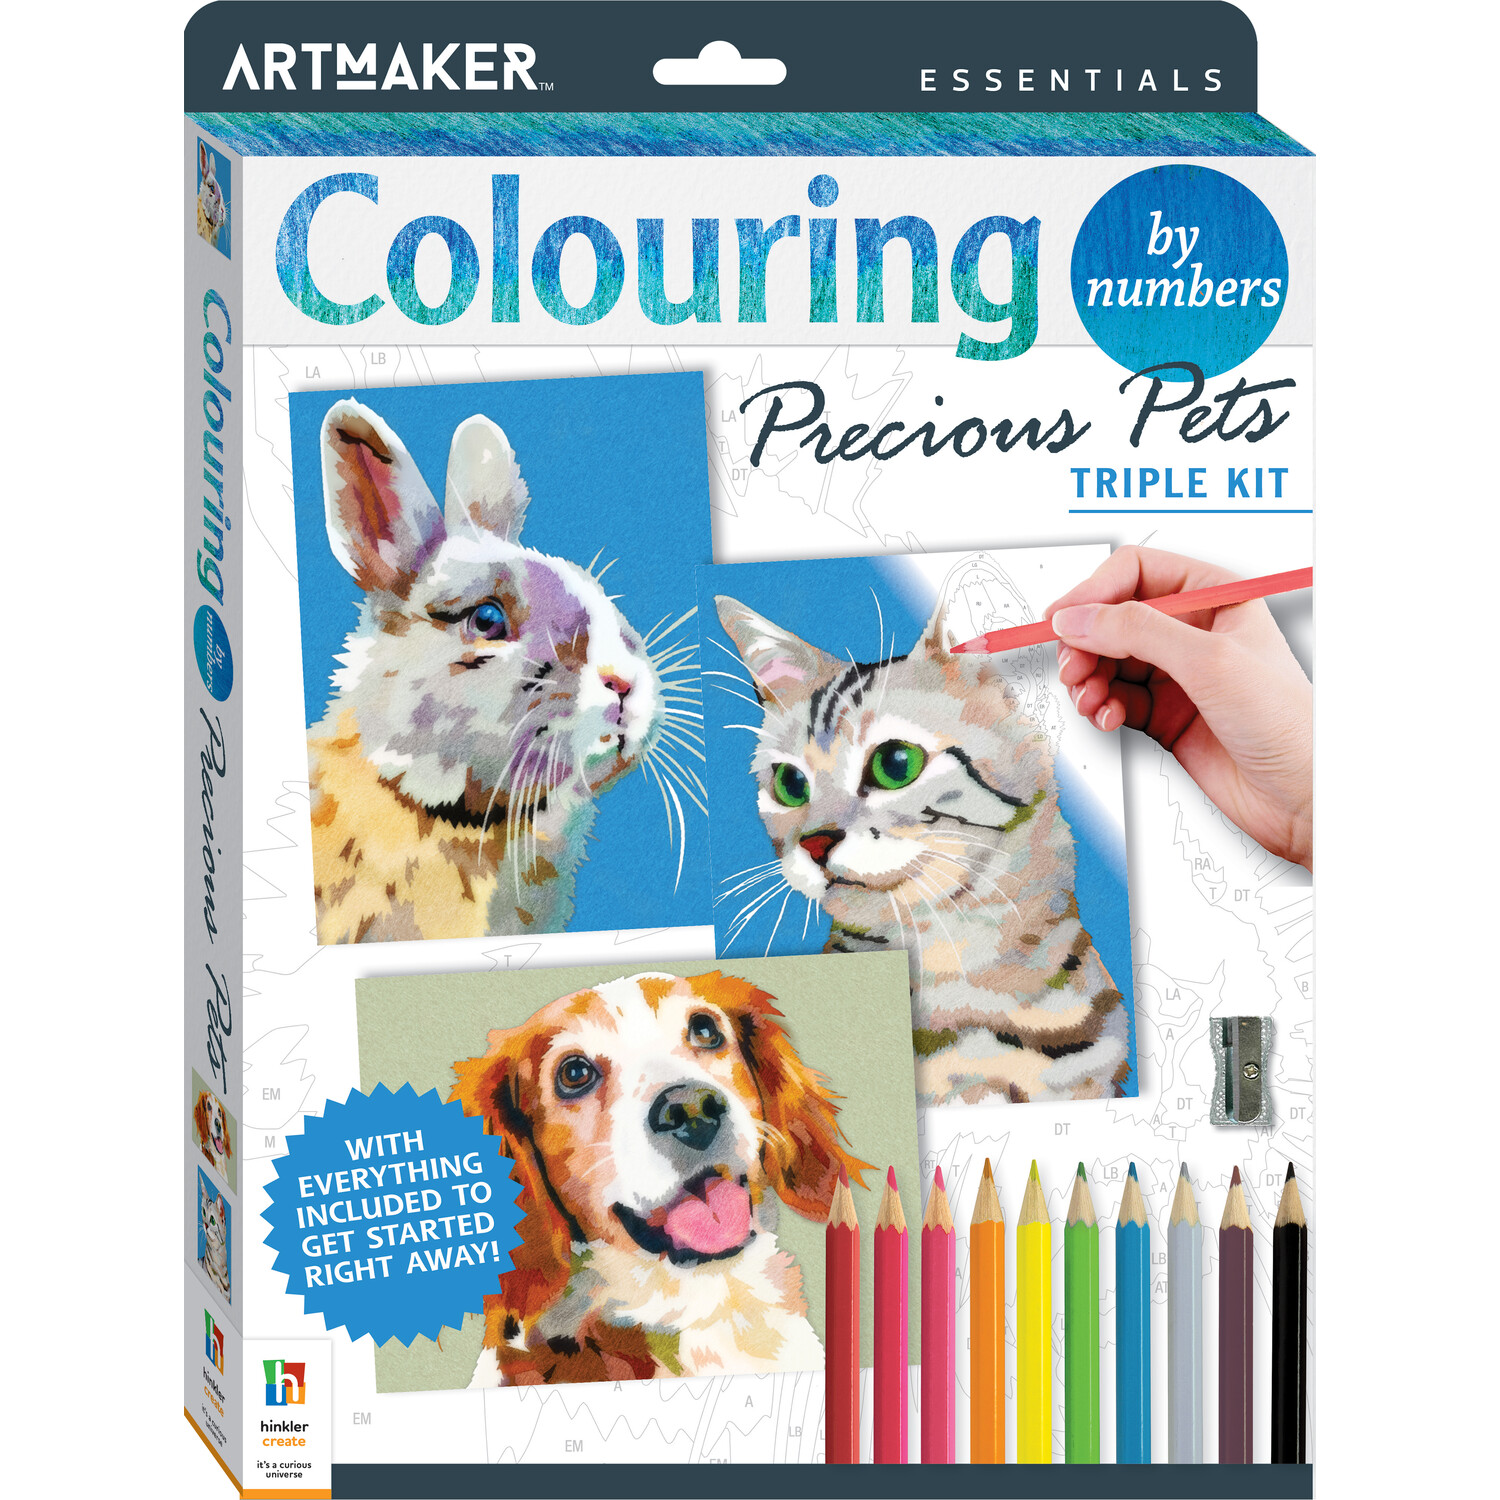 Colouring by Numbers Triple Kit - Precious Pets Image